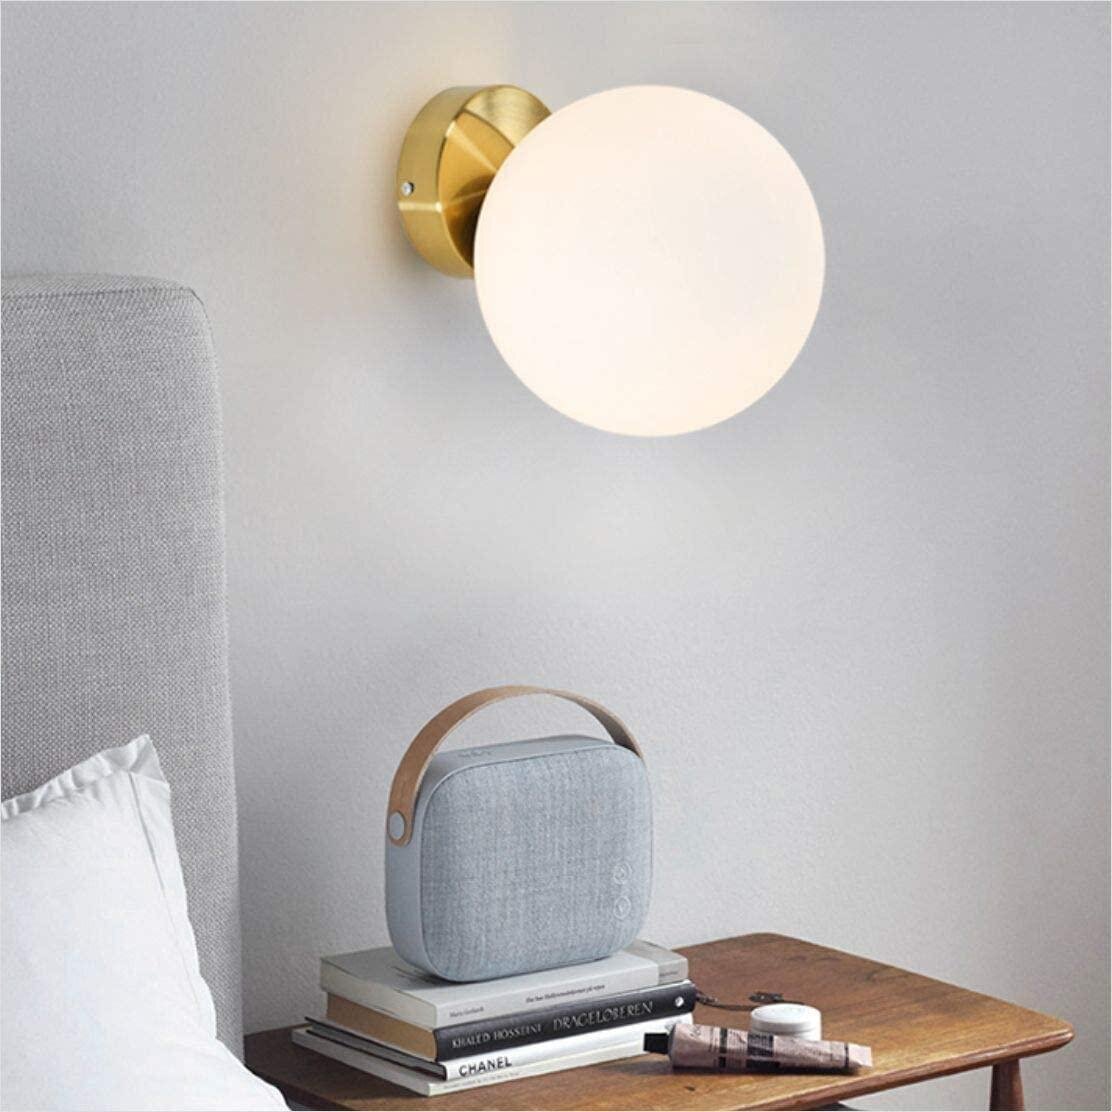 Bedside Lights Wall Mounted with Globe Style